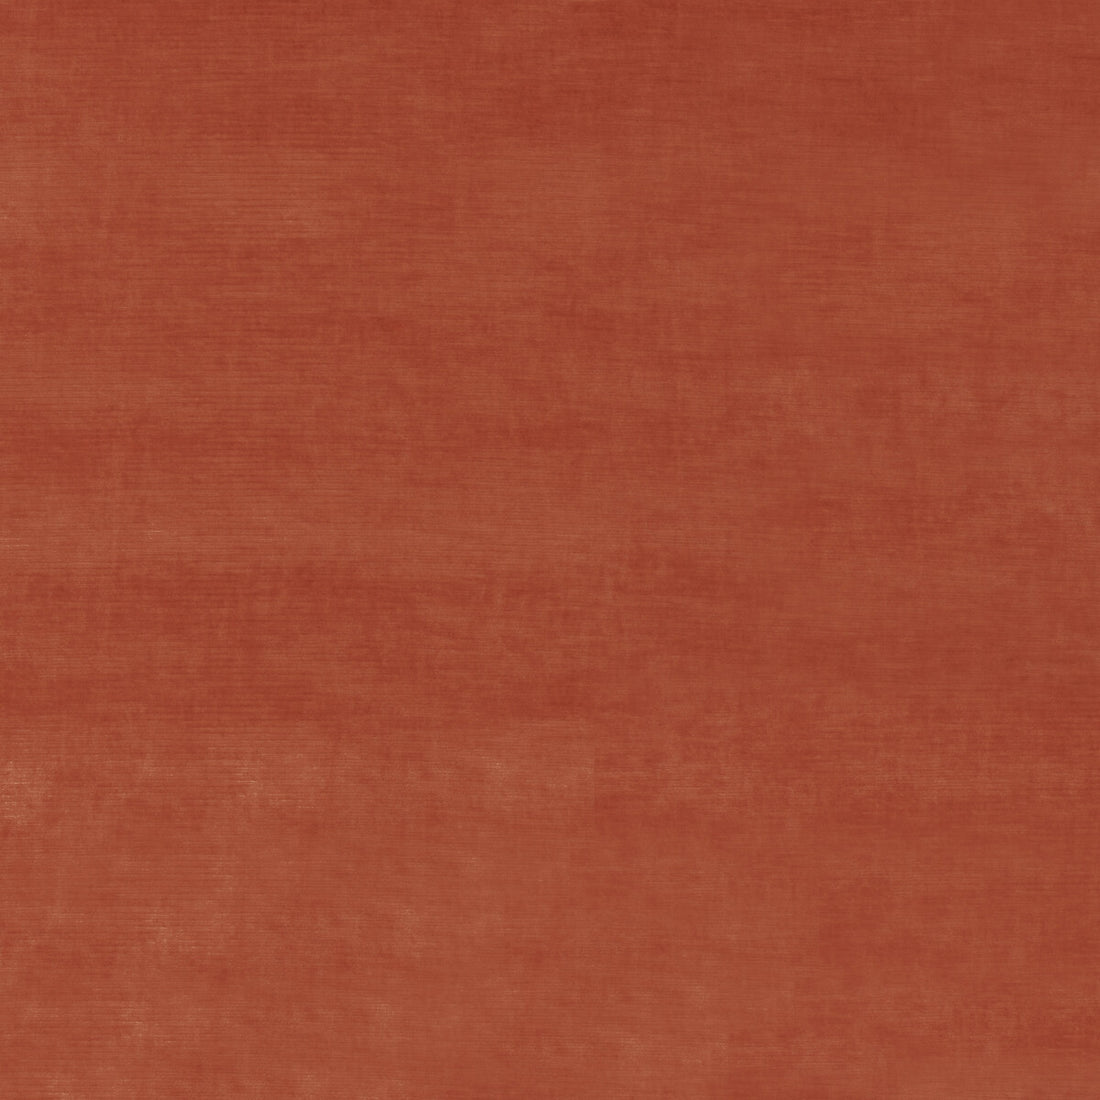 Meridian Velvet fabric in coral color - pattern ED85292.310.0 - by Threads in the Meridian collection